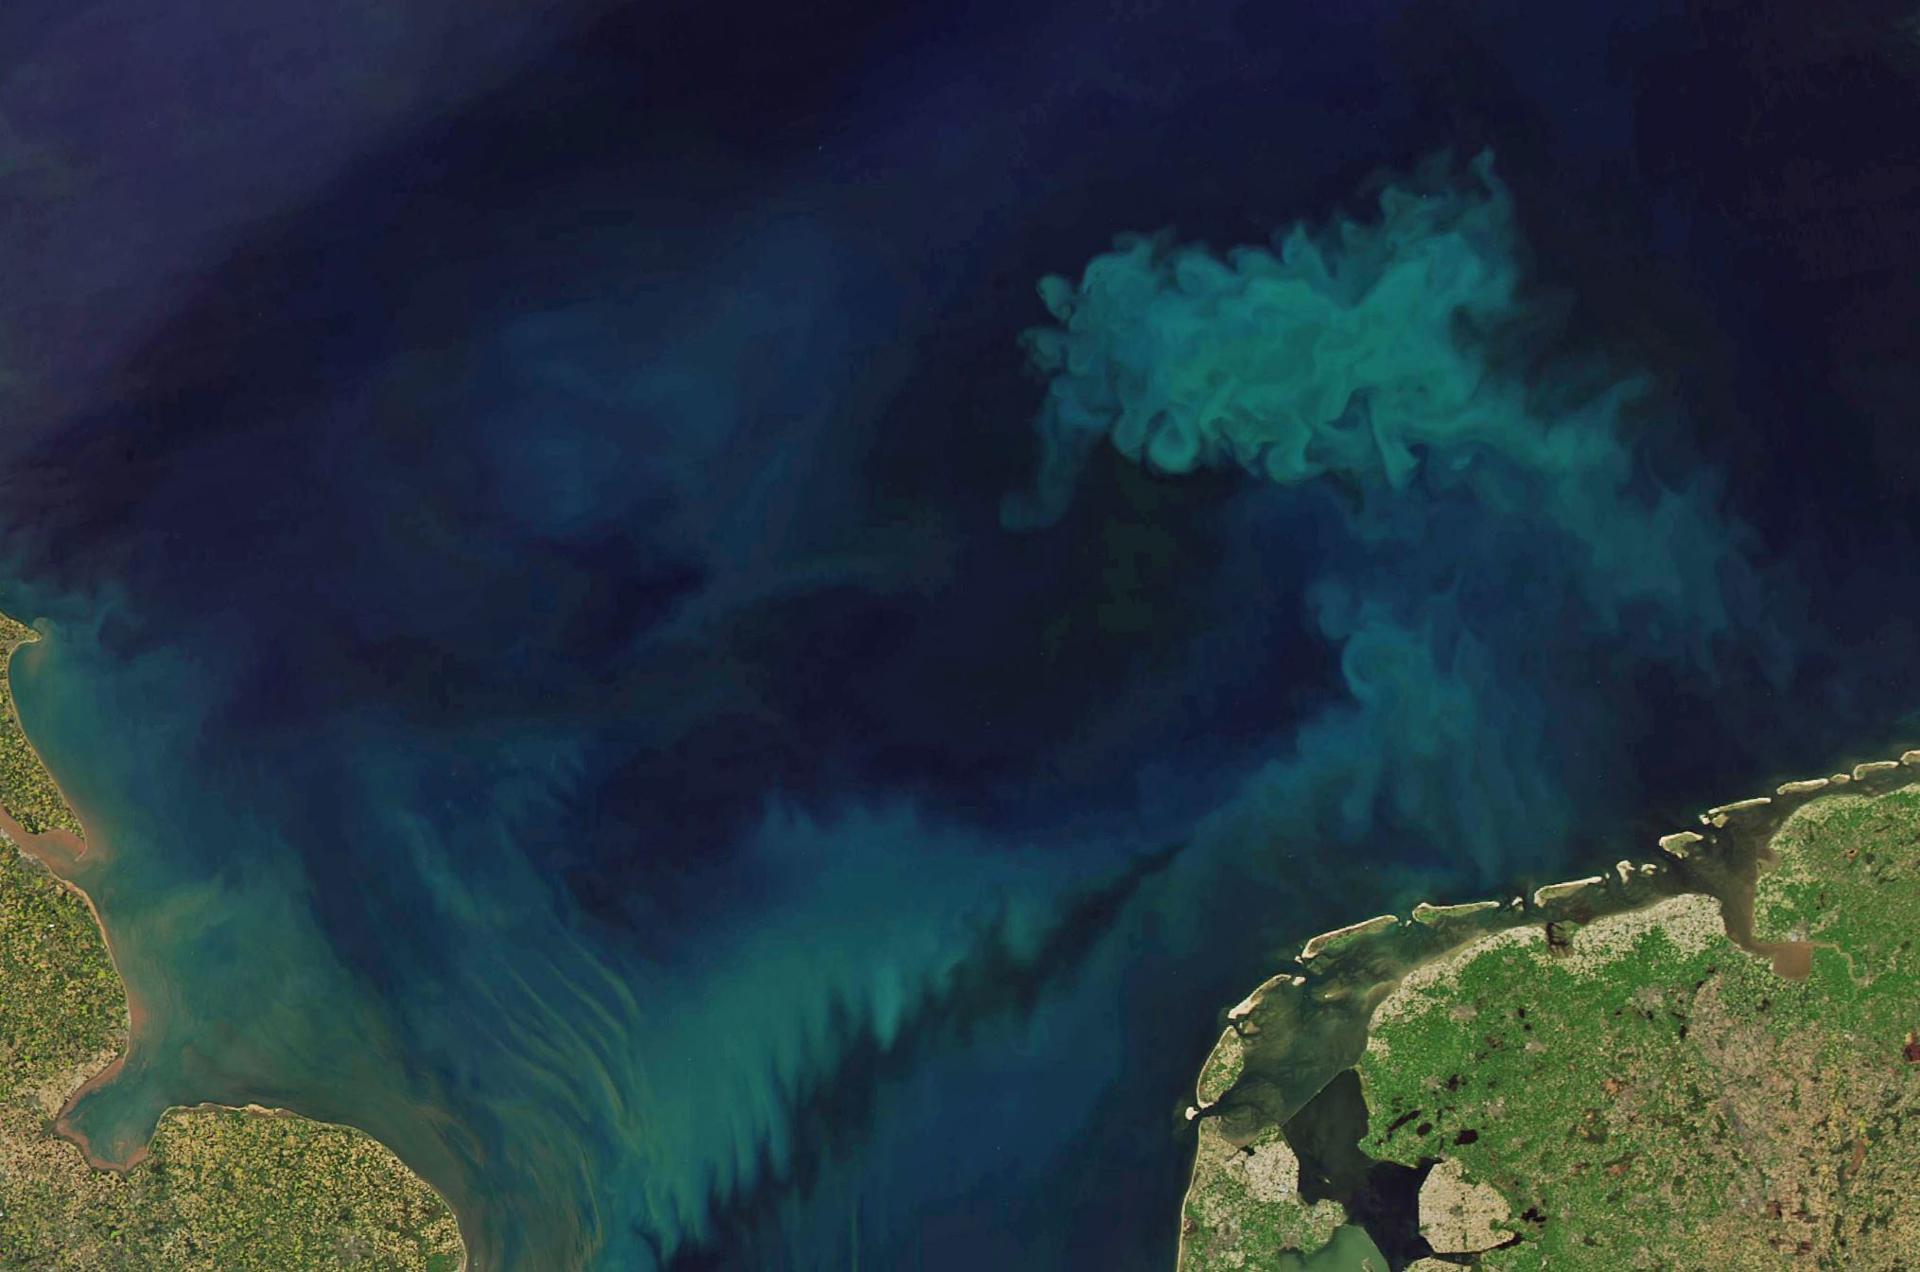 climate change changes the color of the ocean;  It reflects changes in ecosystems